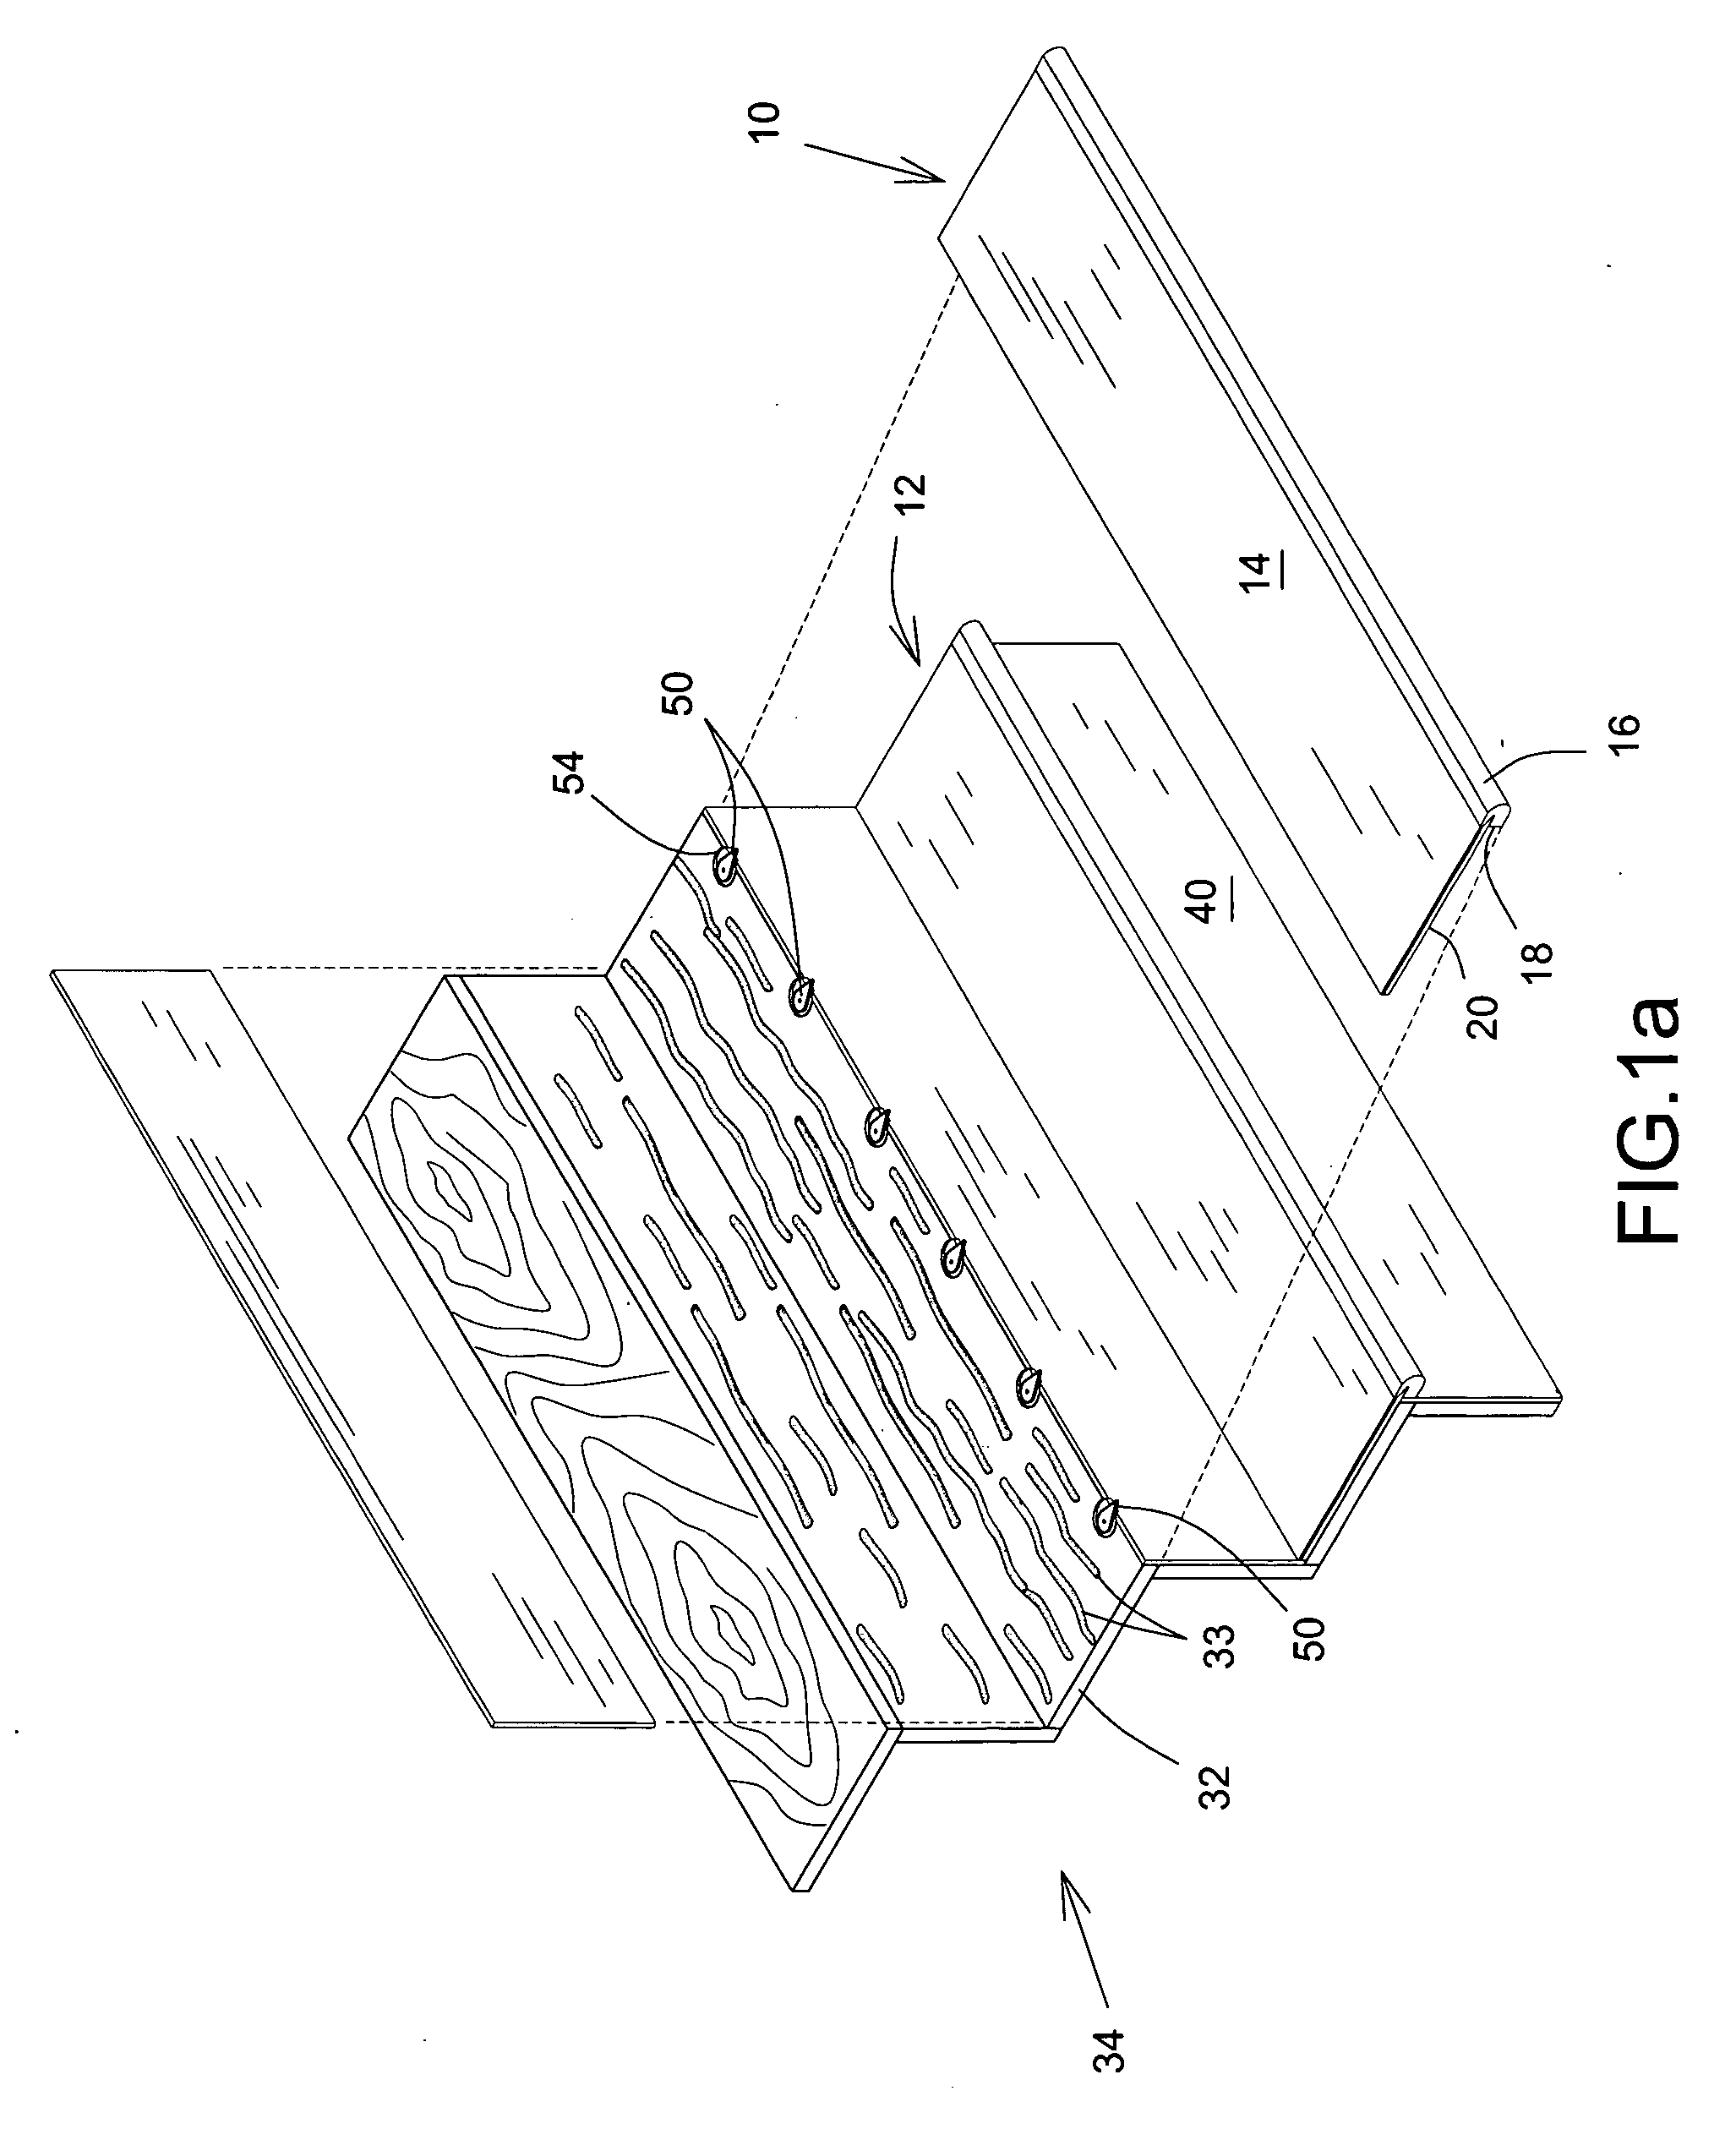 Staircase finishing plate arrangement